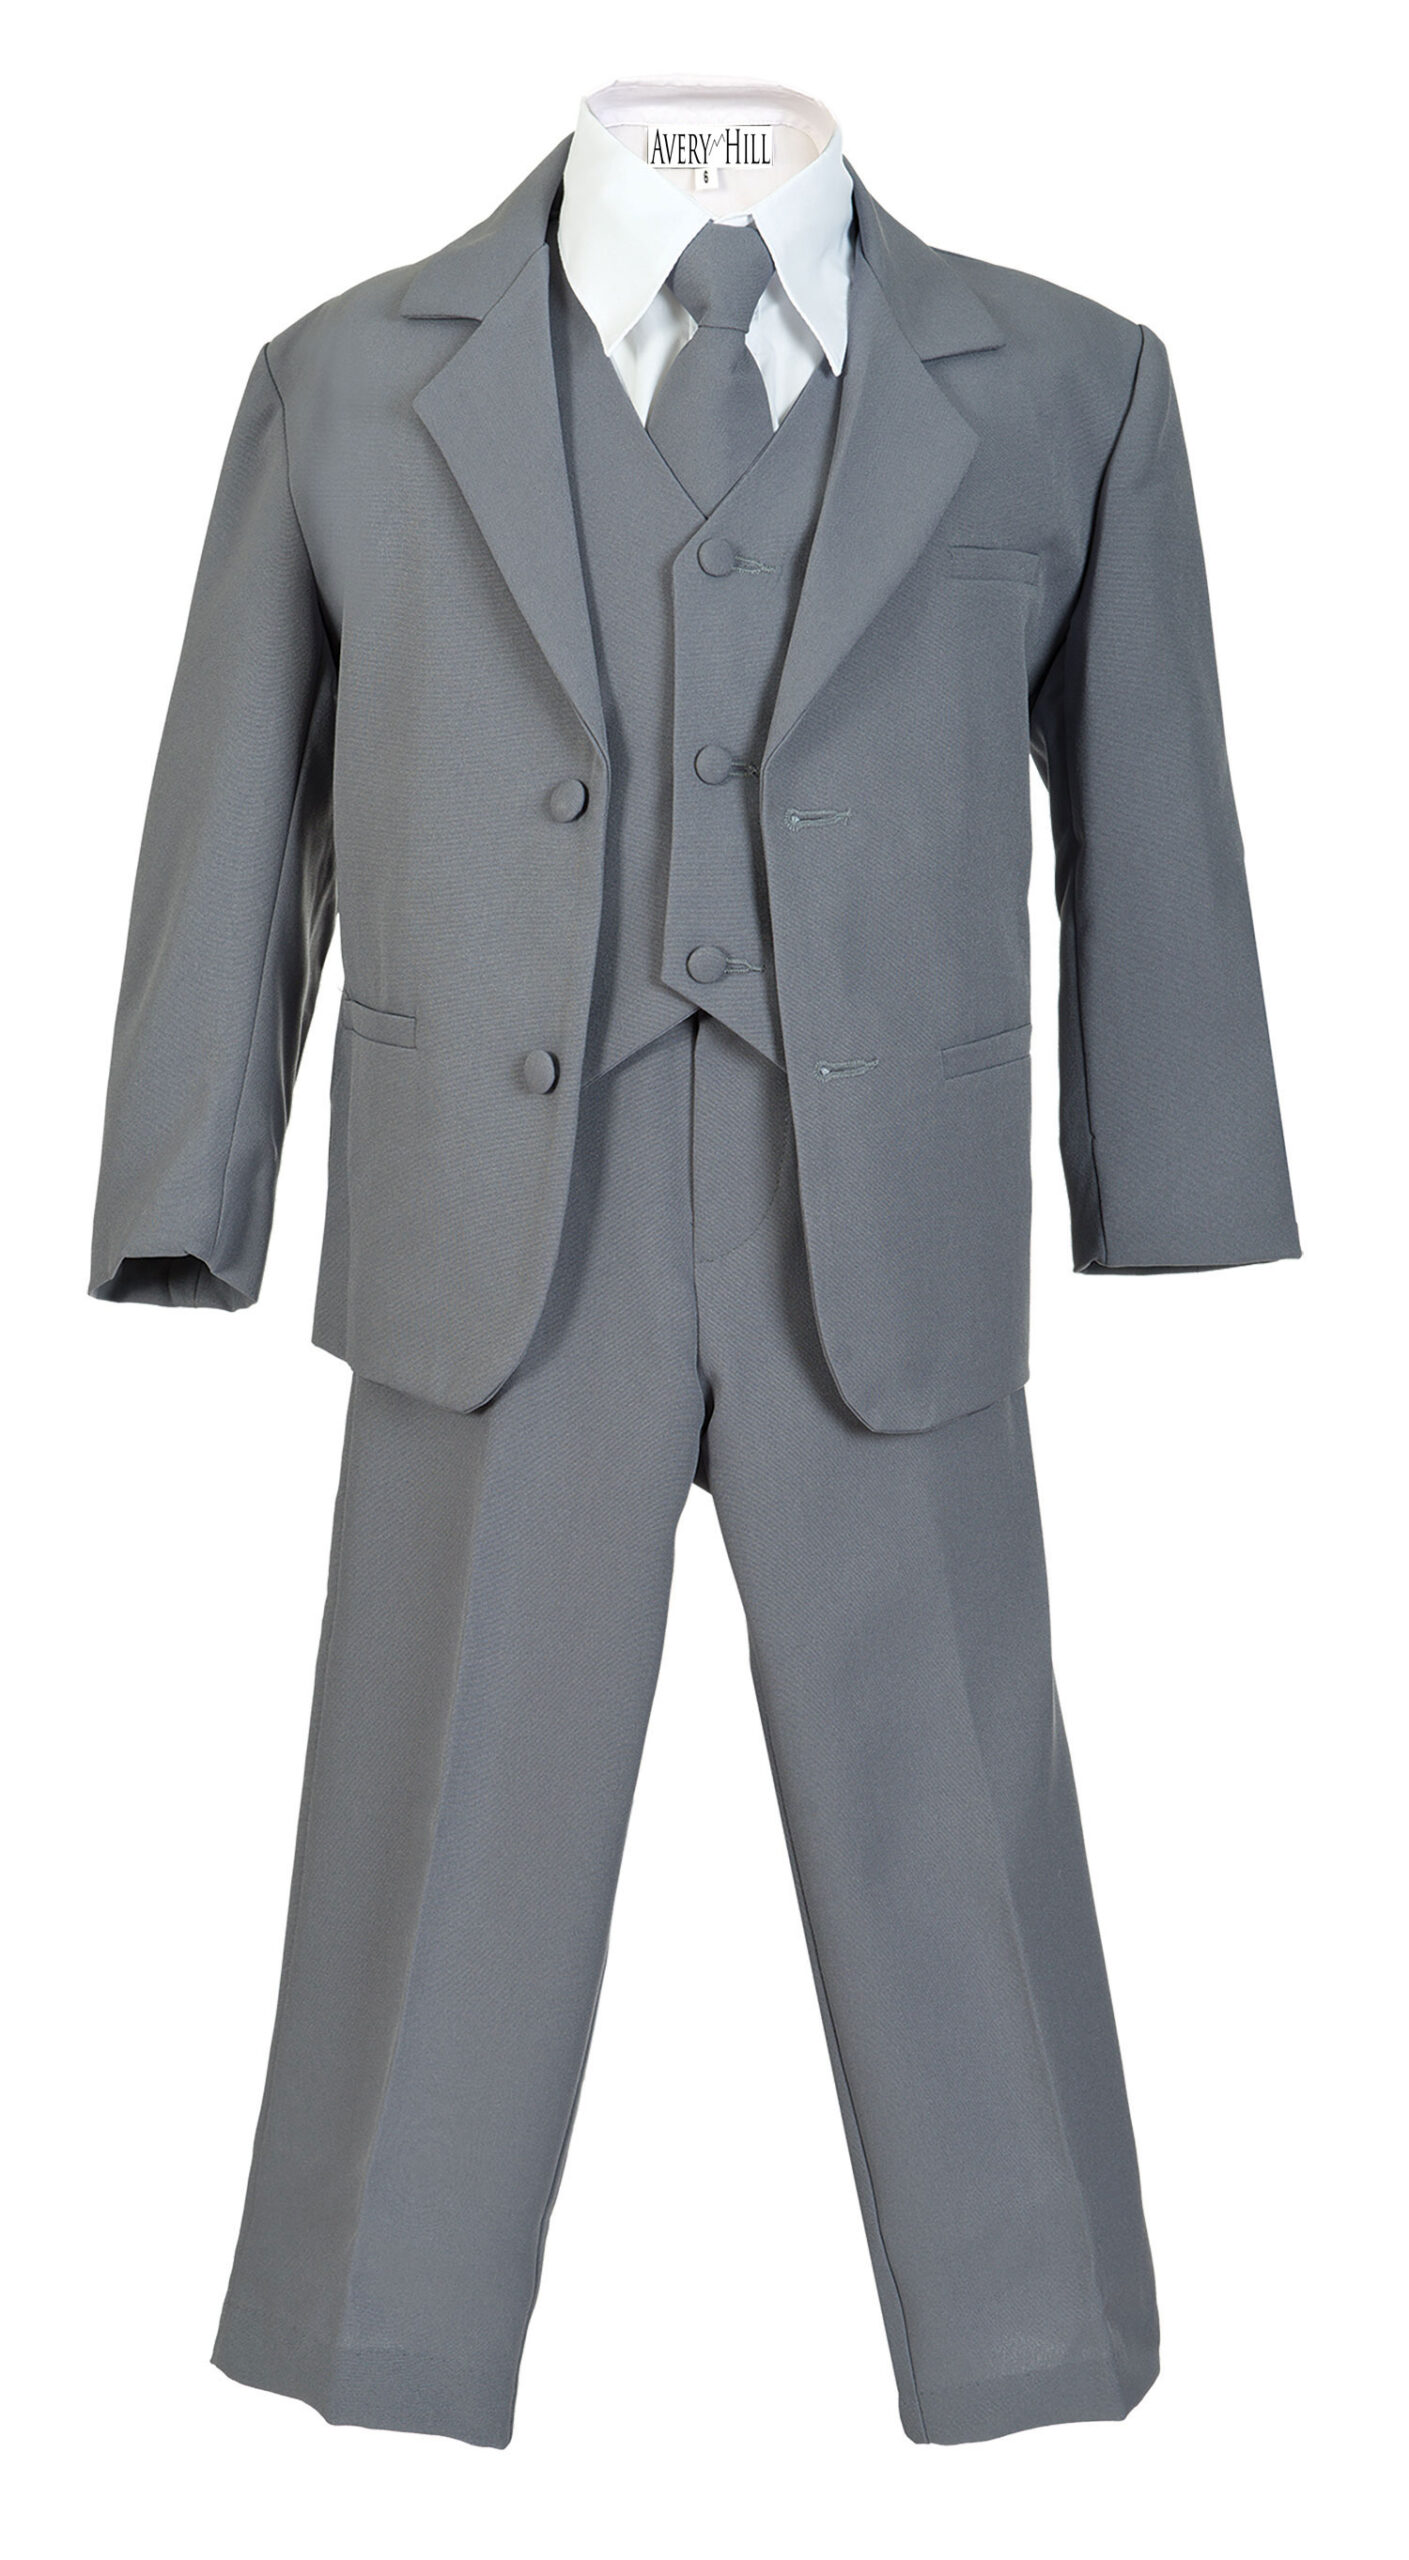 Avery Hill Boys Formal 5 Piece Suit with Shirt and Vest Slate Gray - 16